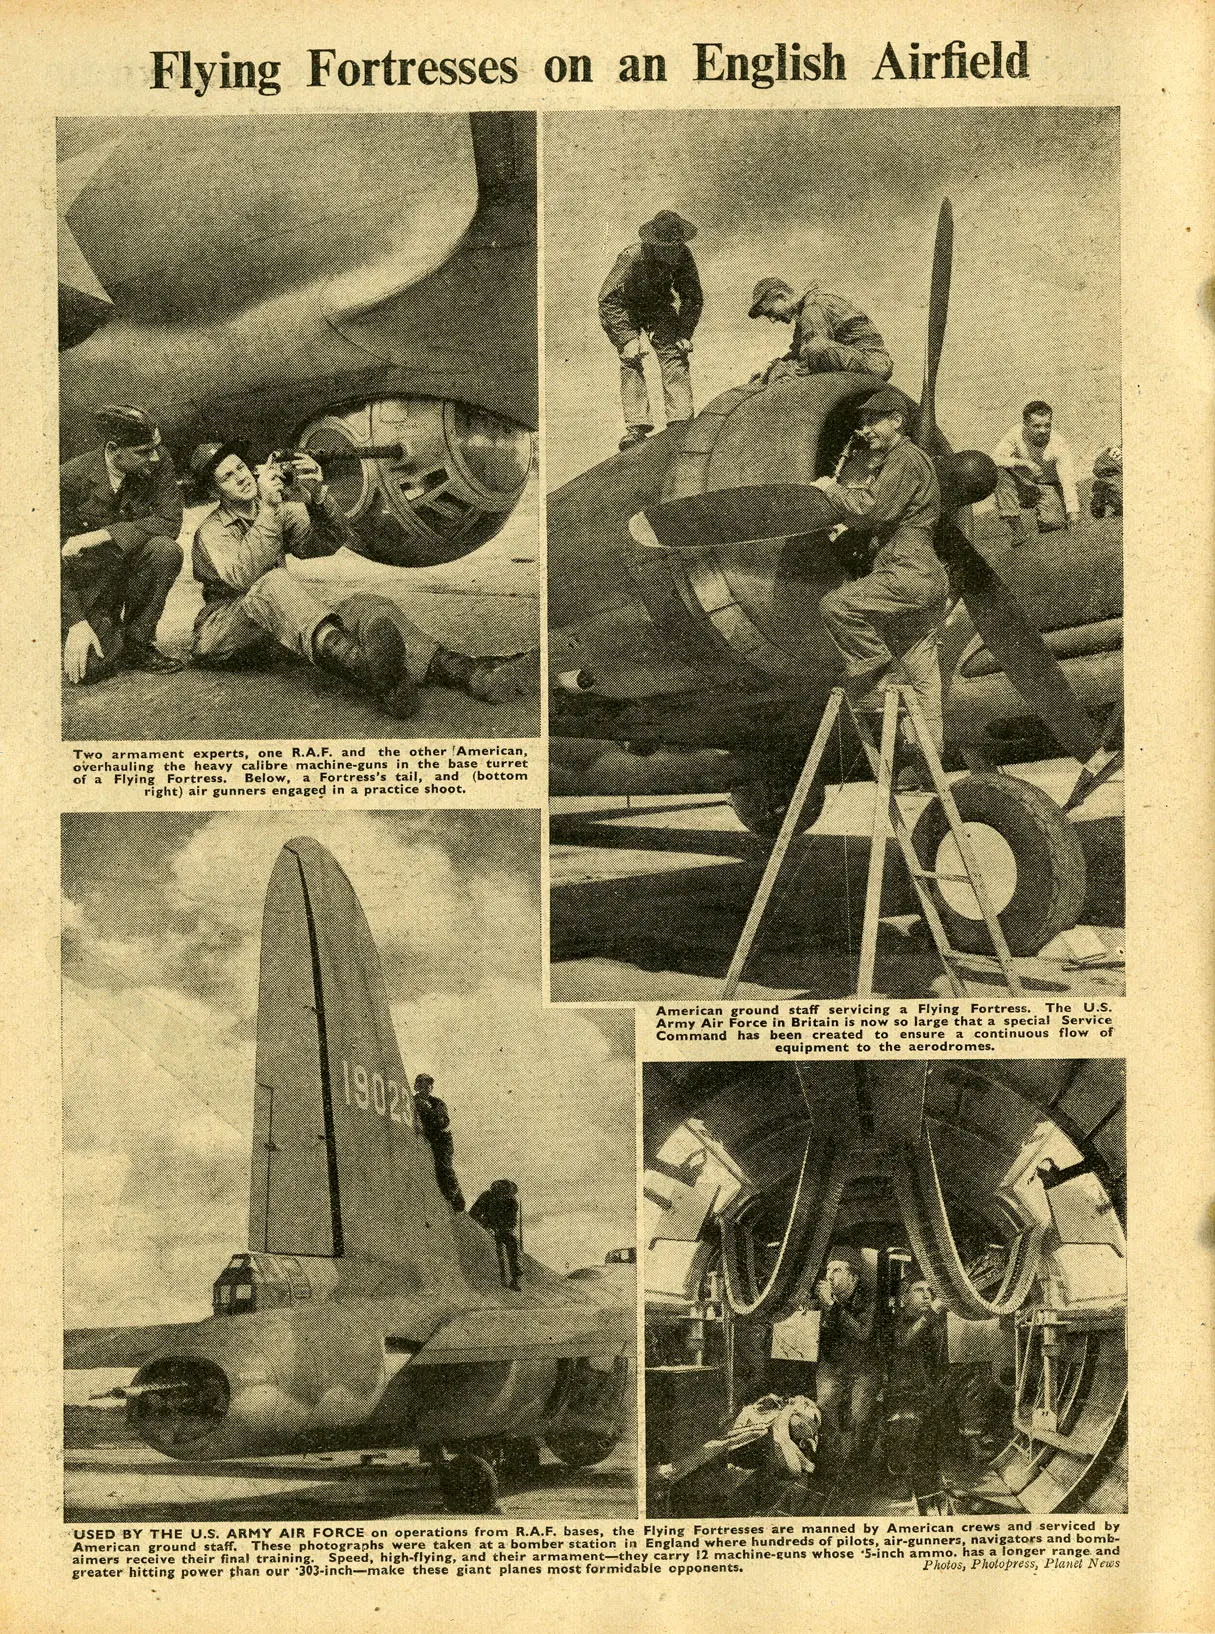 A page of The War Illustrated showing several pictures of air crews doing maintenance on warplanes, inside and out.